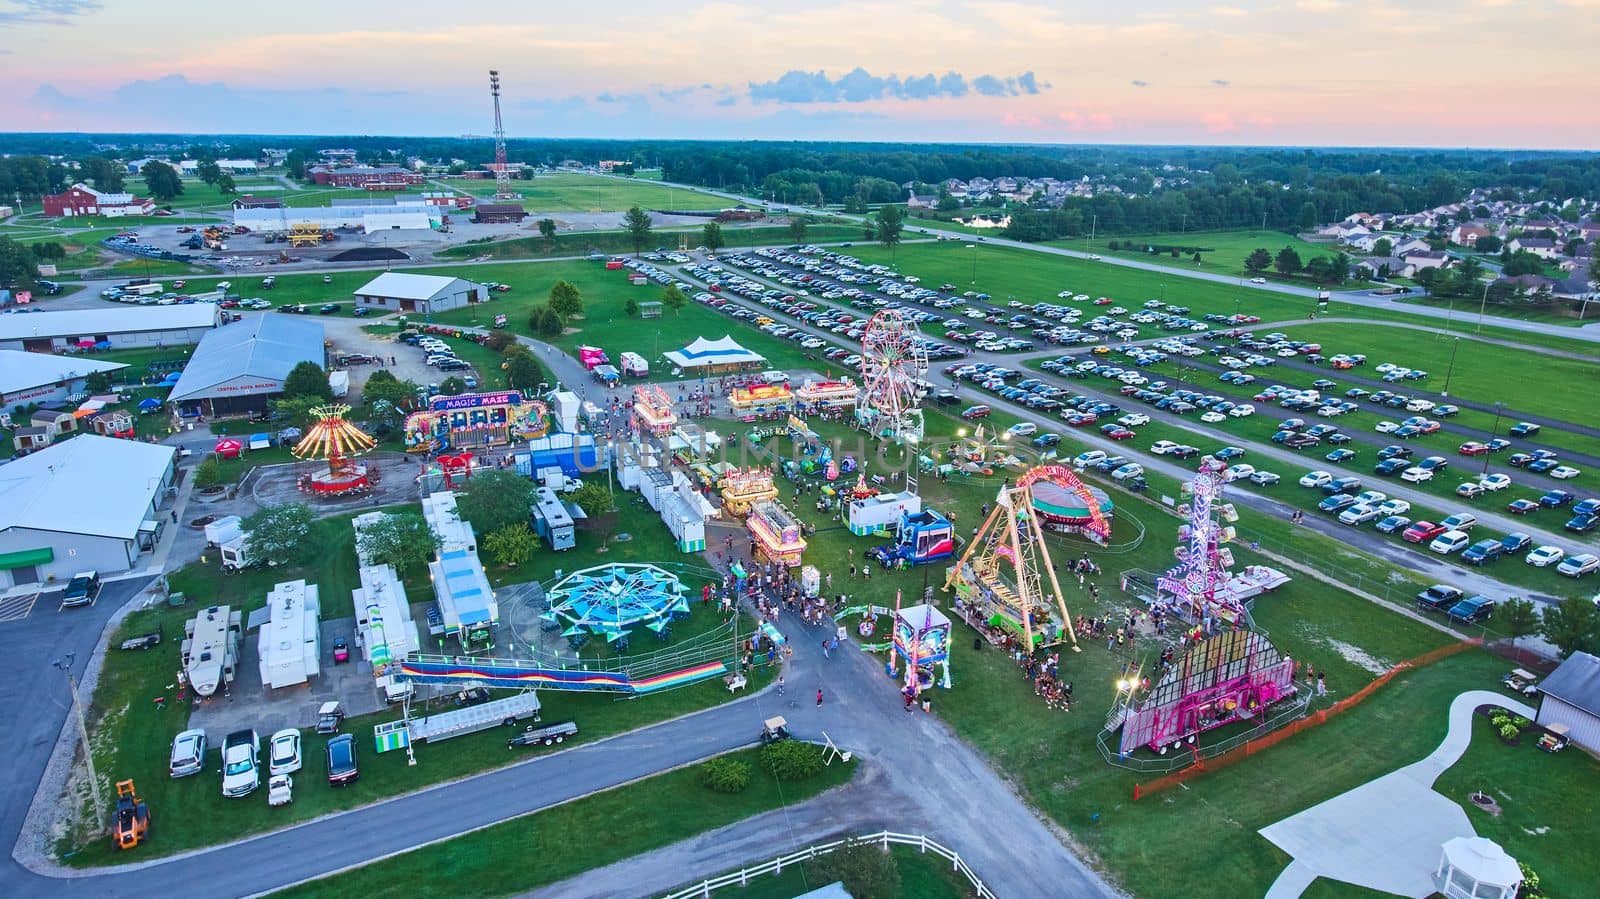 Image of Carnival aerial during dusk in midwest America county fair